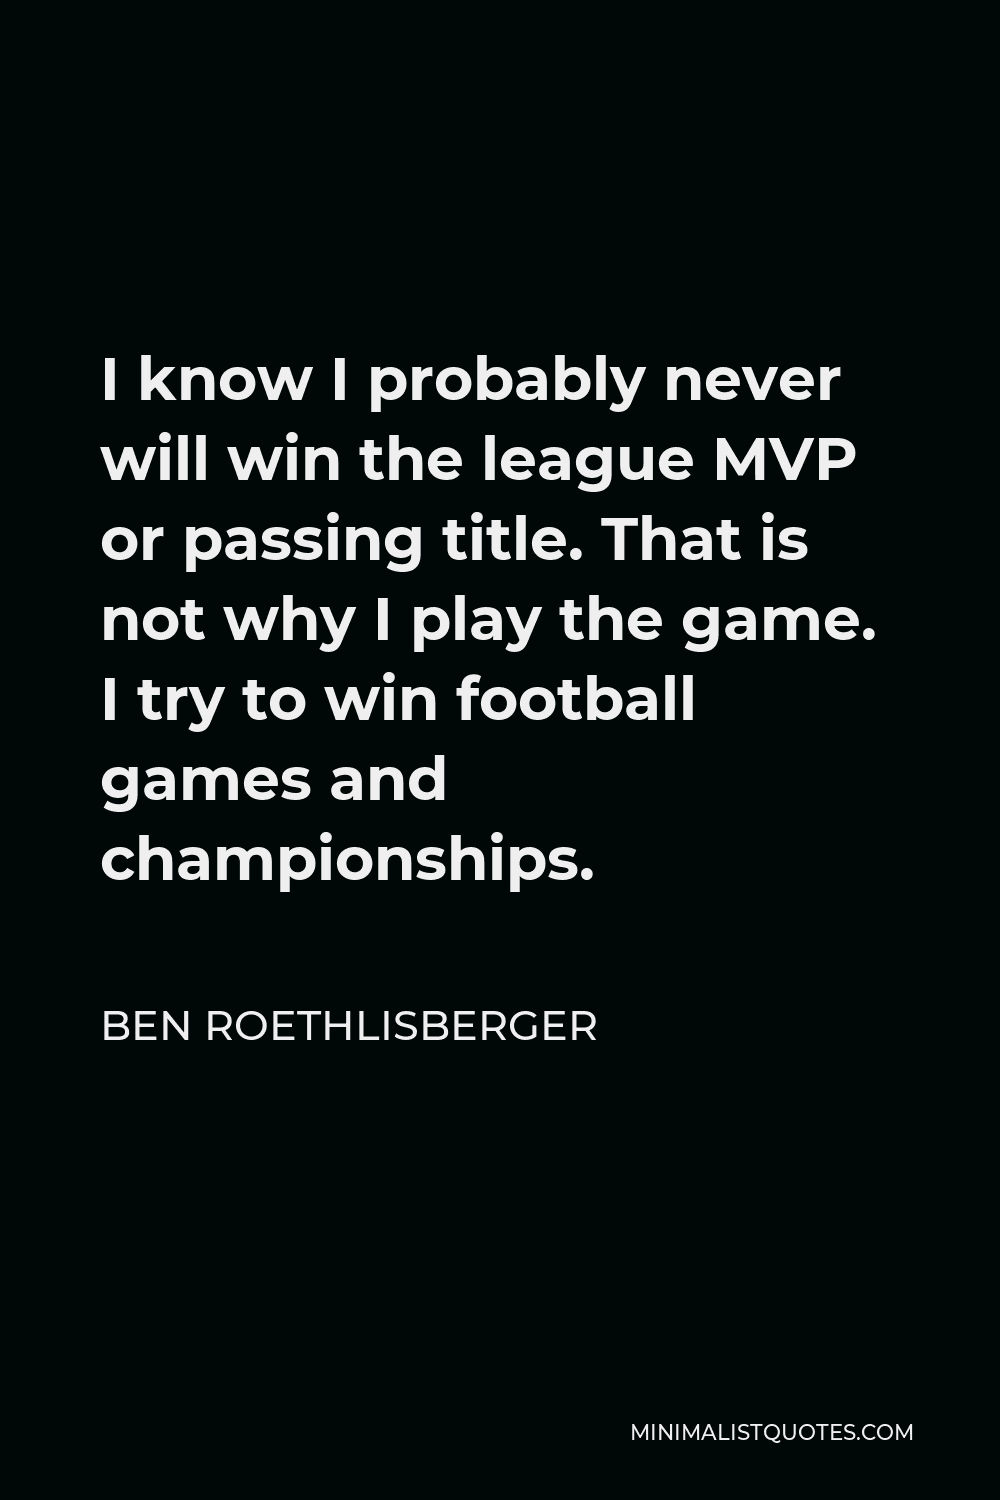 Ben Roethlisberger Quote - I know I probably never will win the league MVP or passing title. That is not why I play the game. I try to win football games and championships.